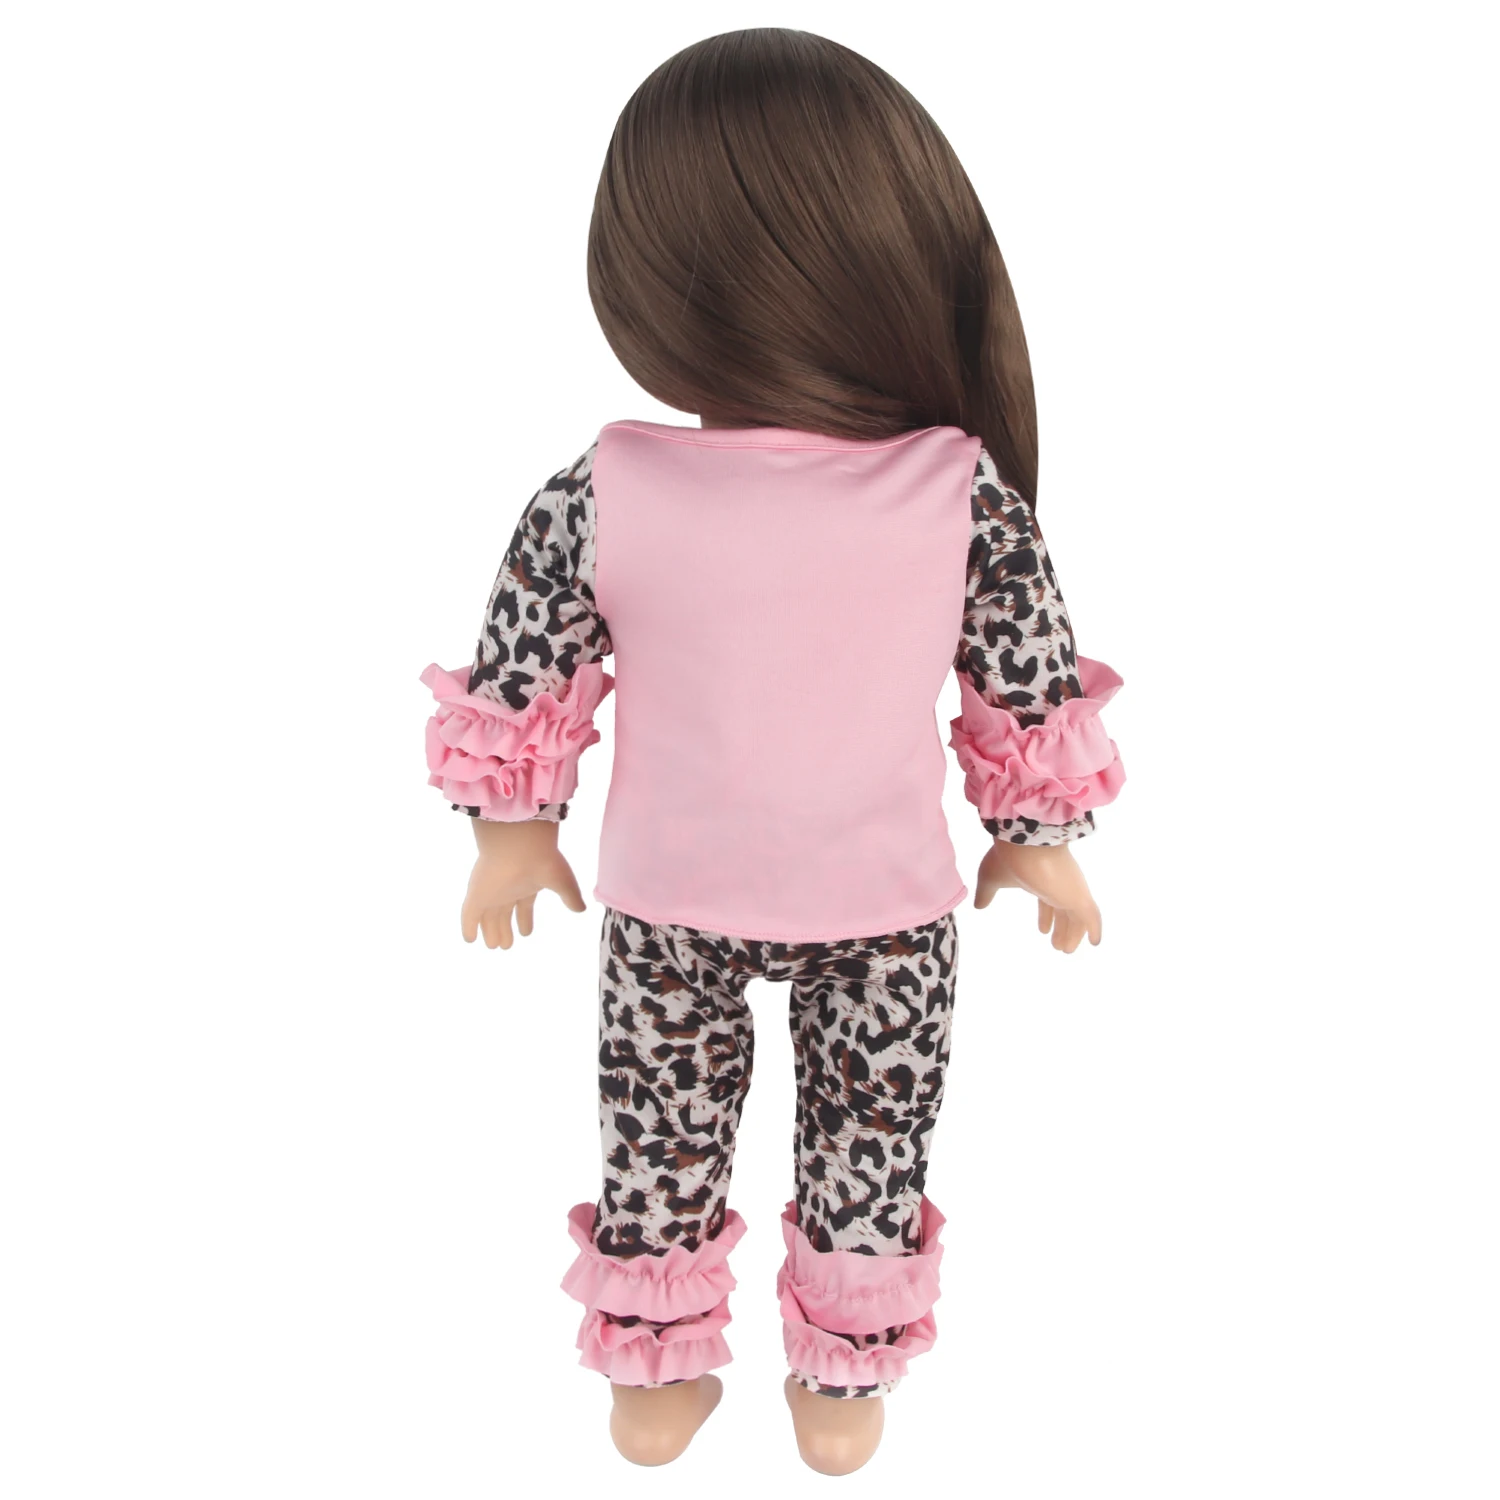 New Arrival 18 inch American Doll Leopard print pink pajamas Girl  Doll Clothes